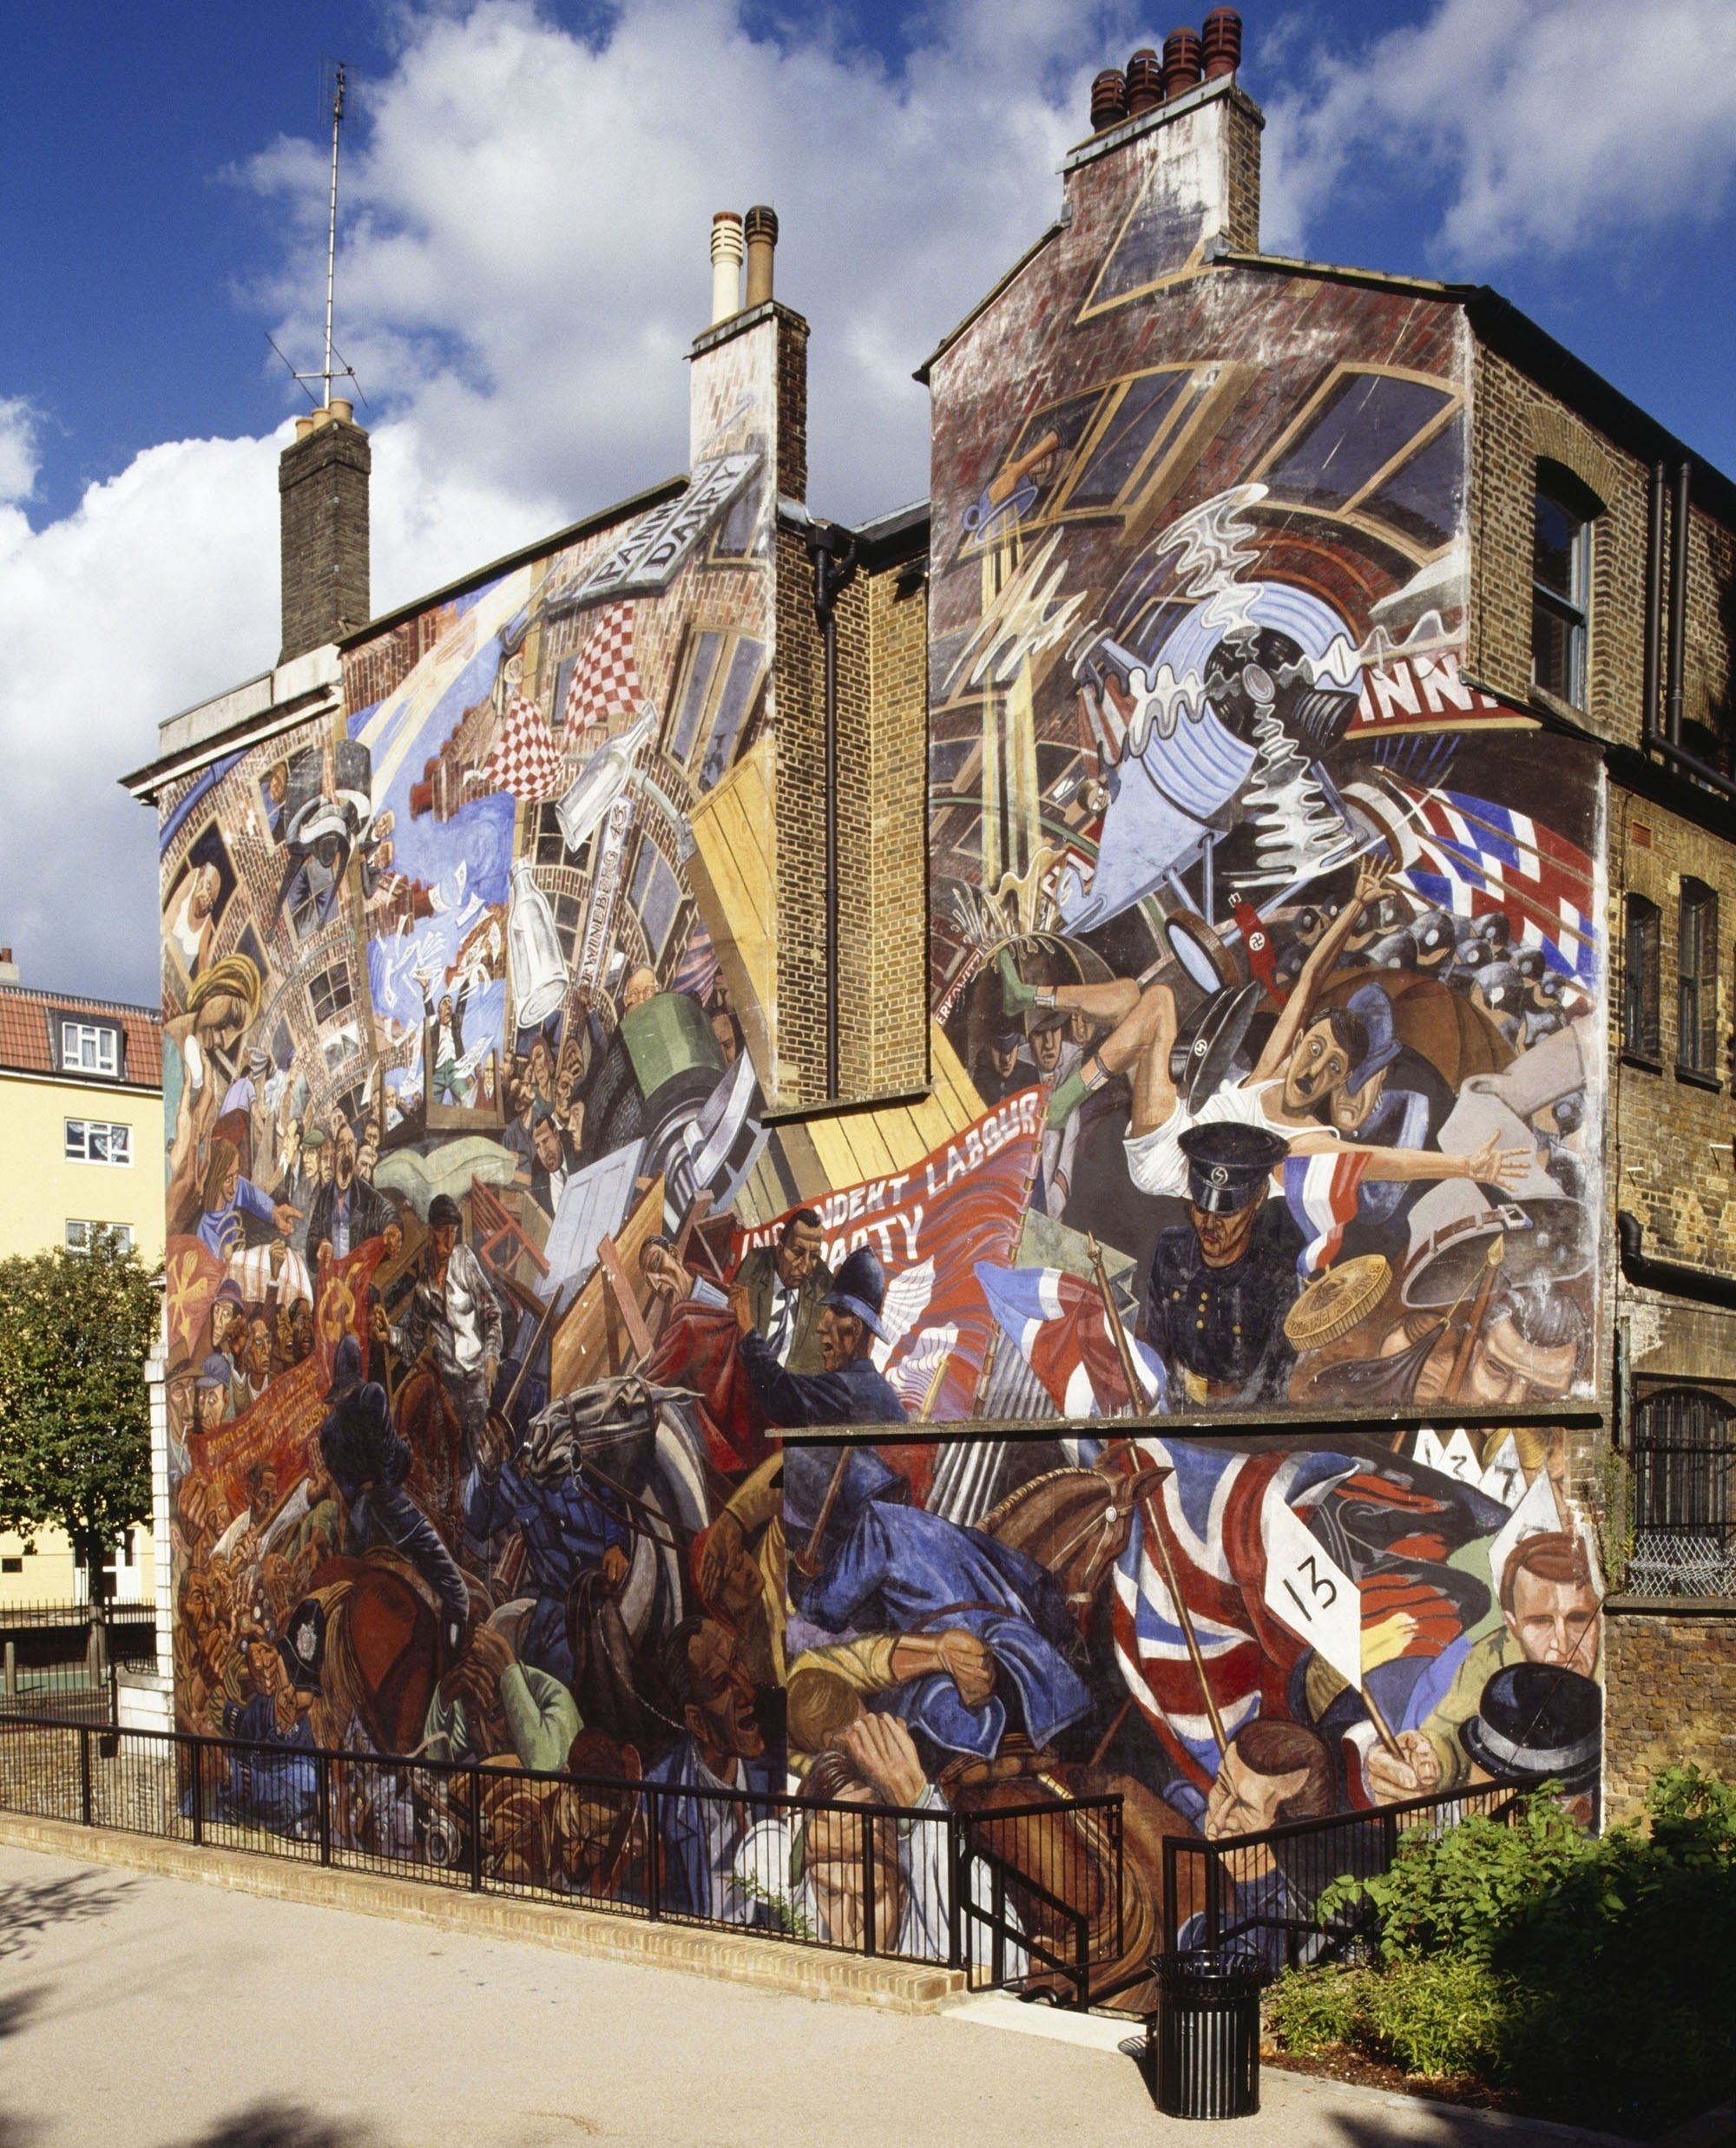 Mural on the former St George's Town Hall in Tower Hamlets, London